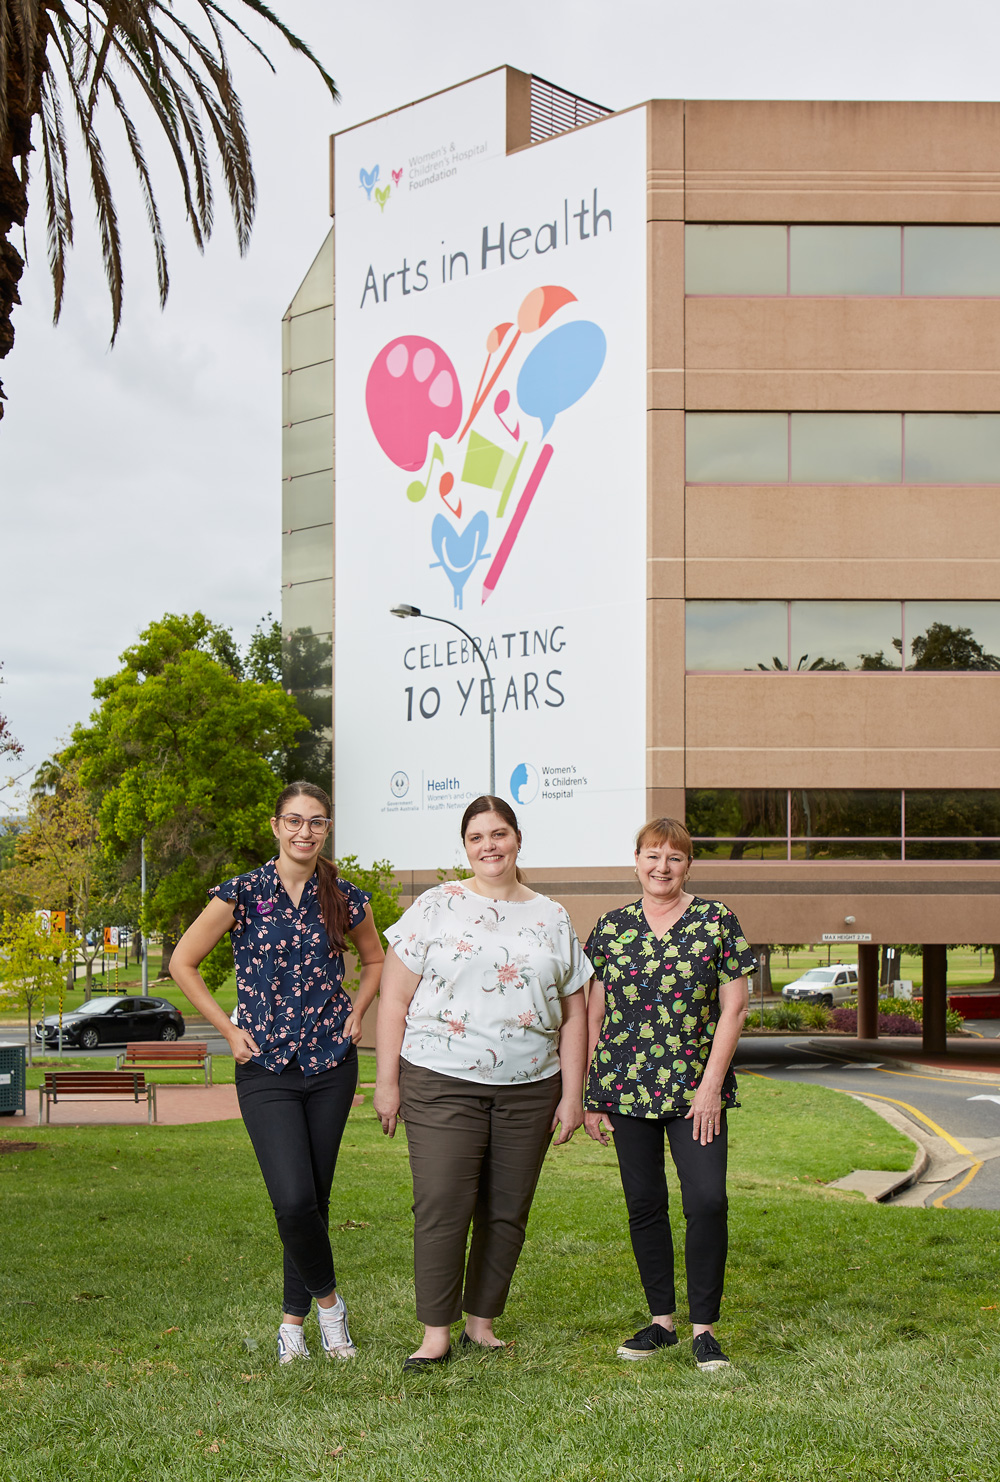 Banner celebrating 10 years of Arts in Health.